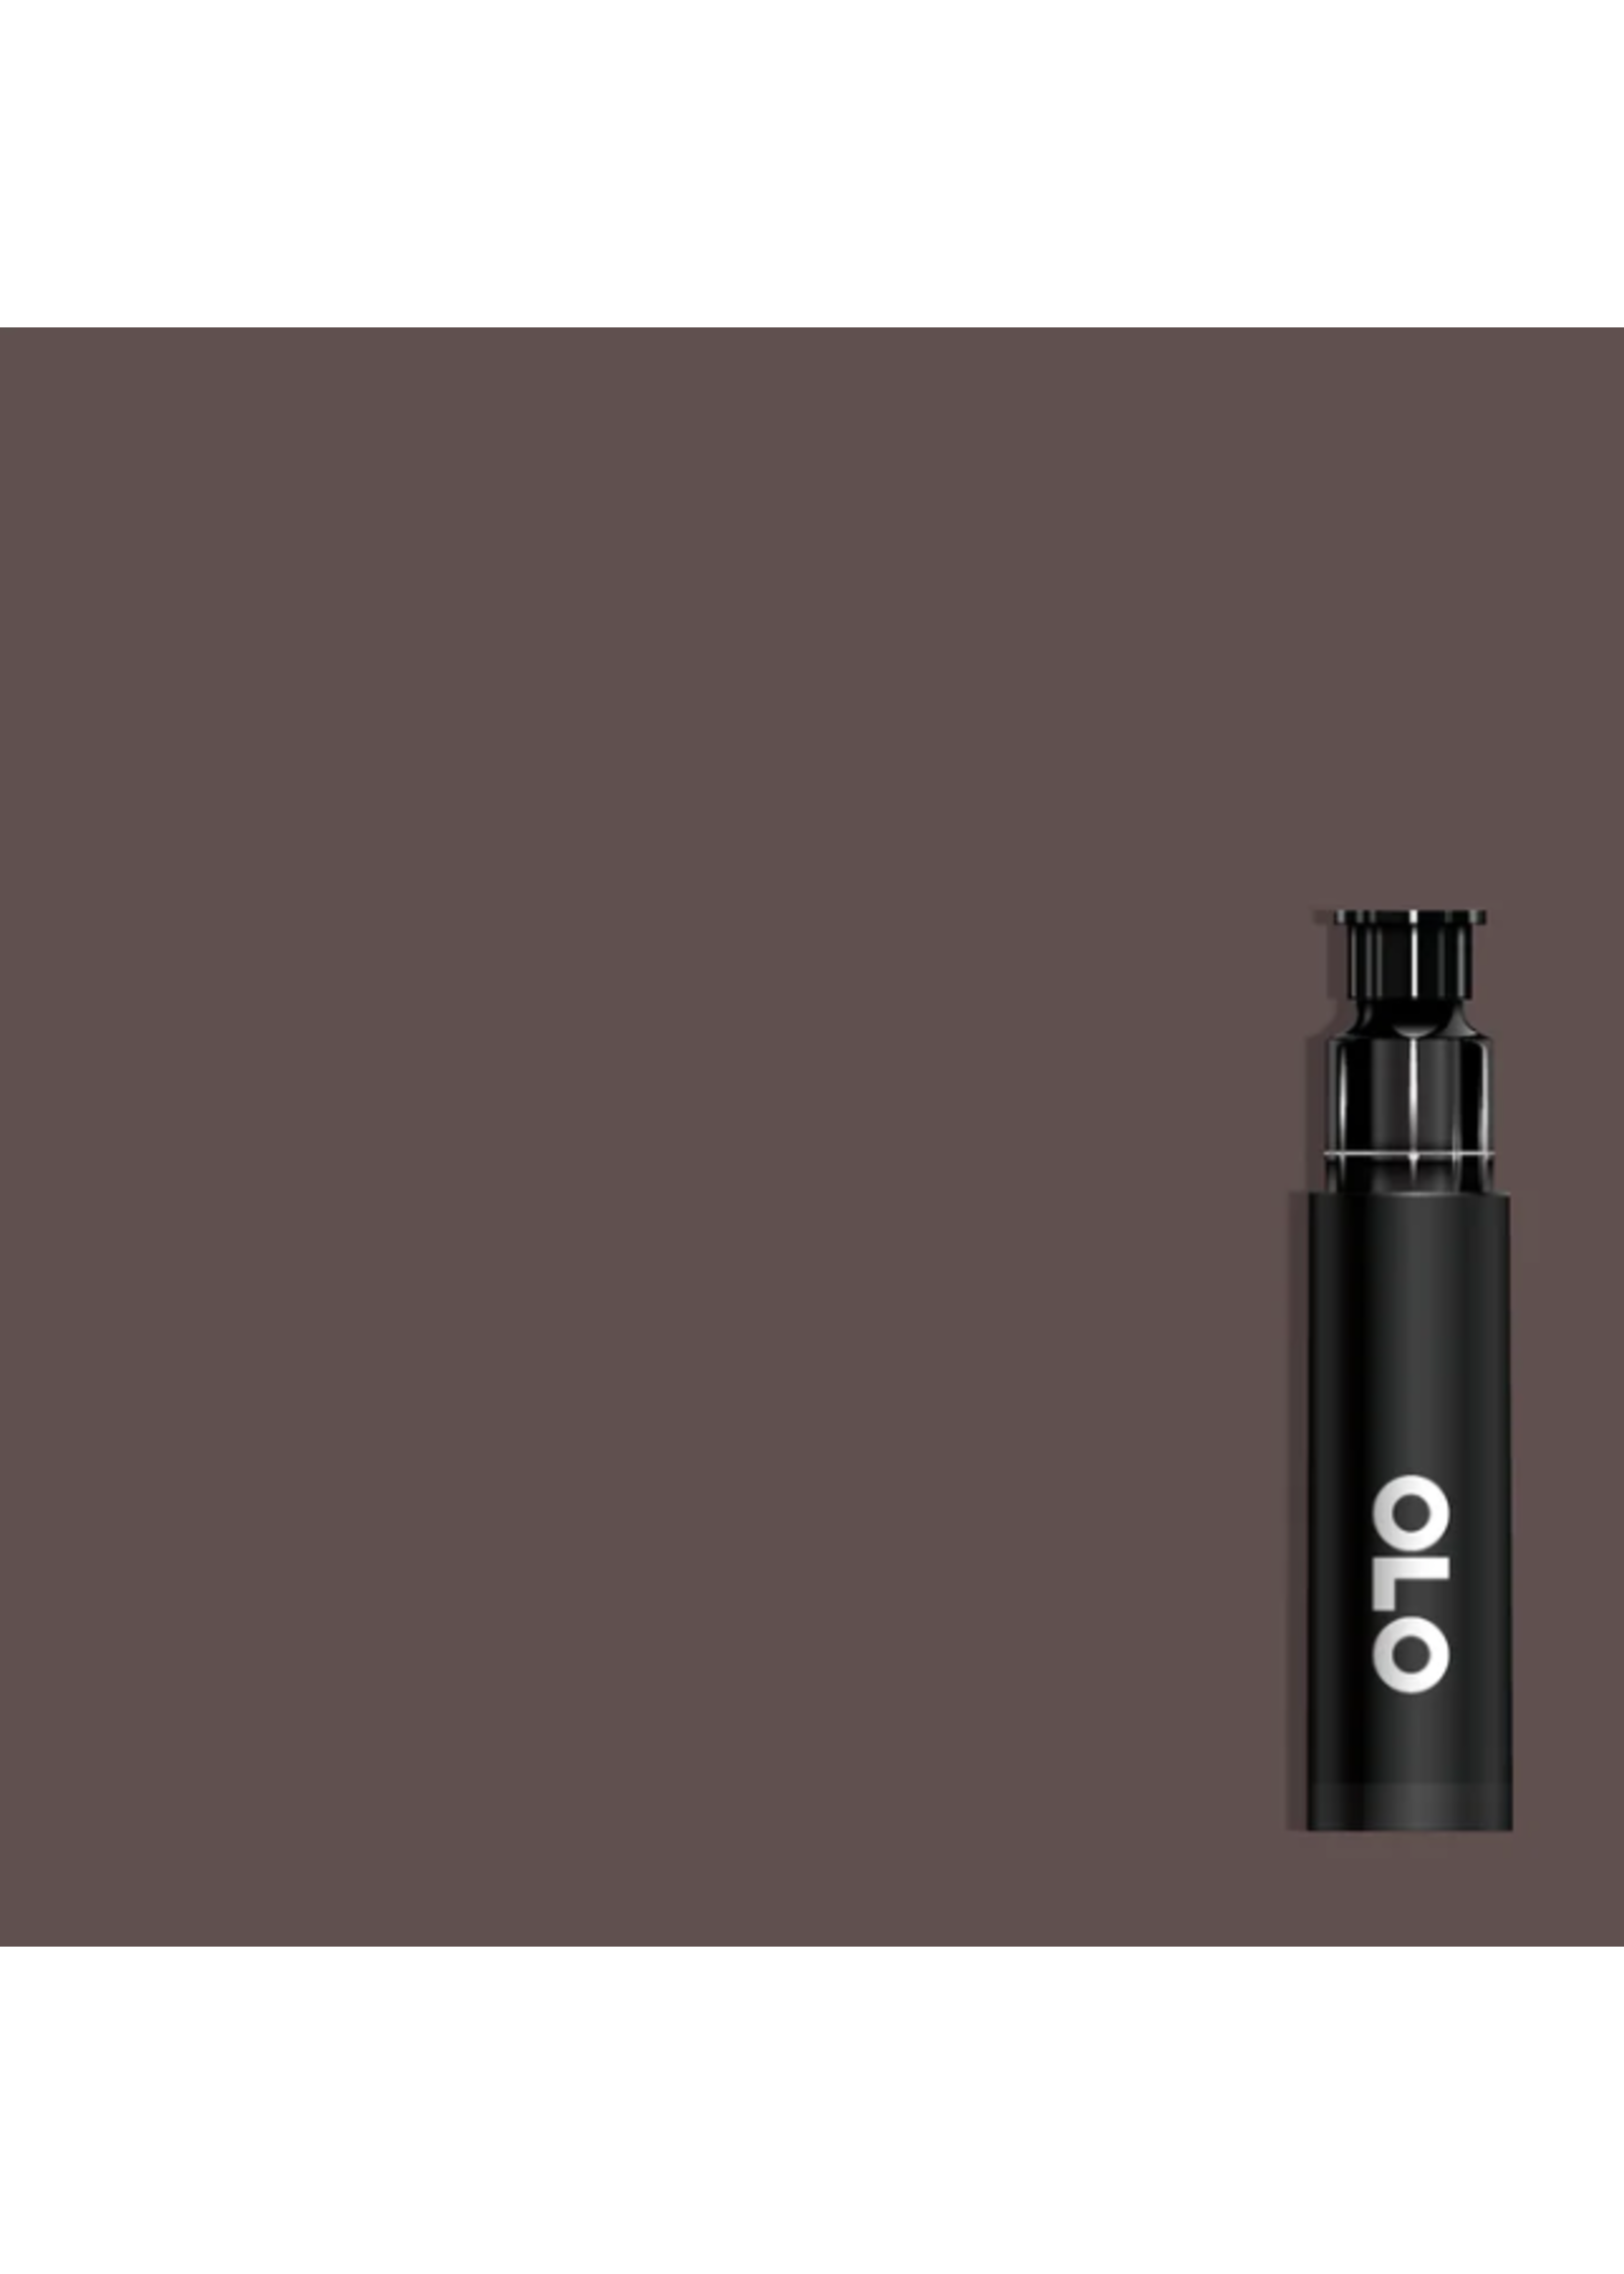 OLO OLO Brush Replacement Cartridge: Red Gray 6